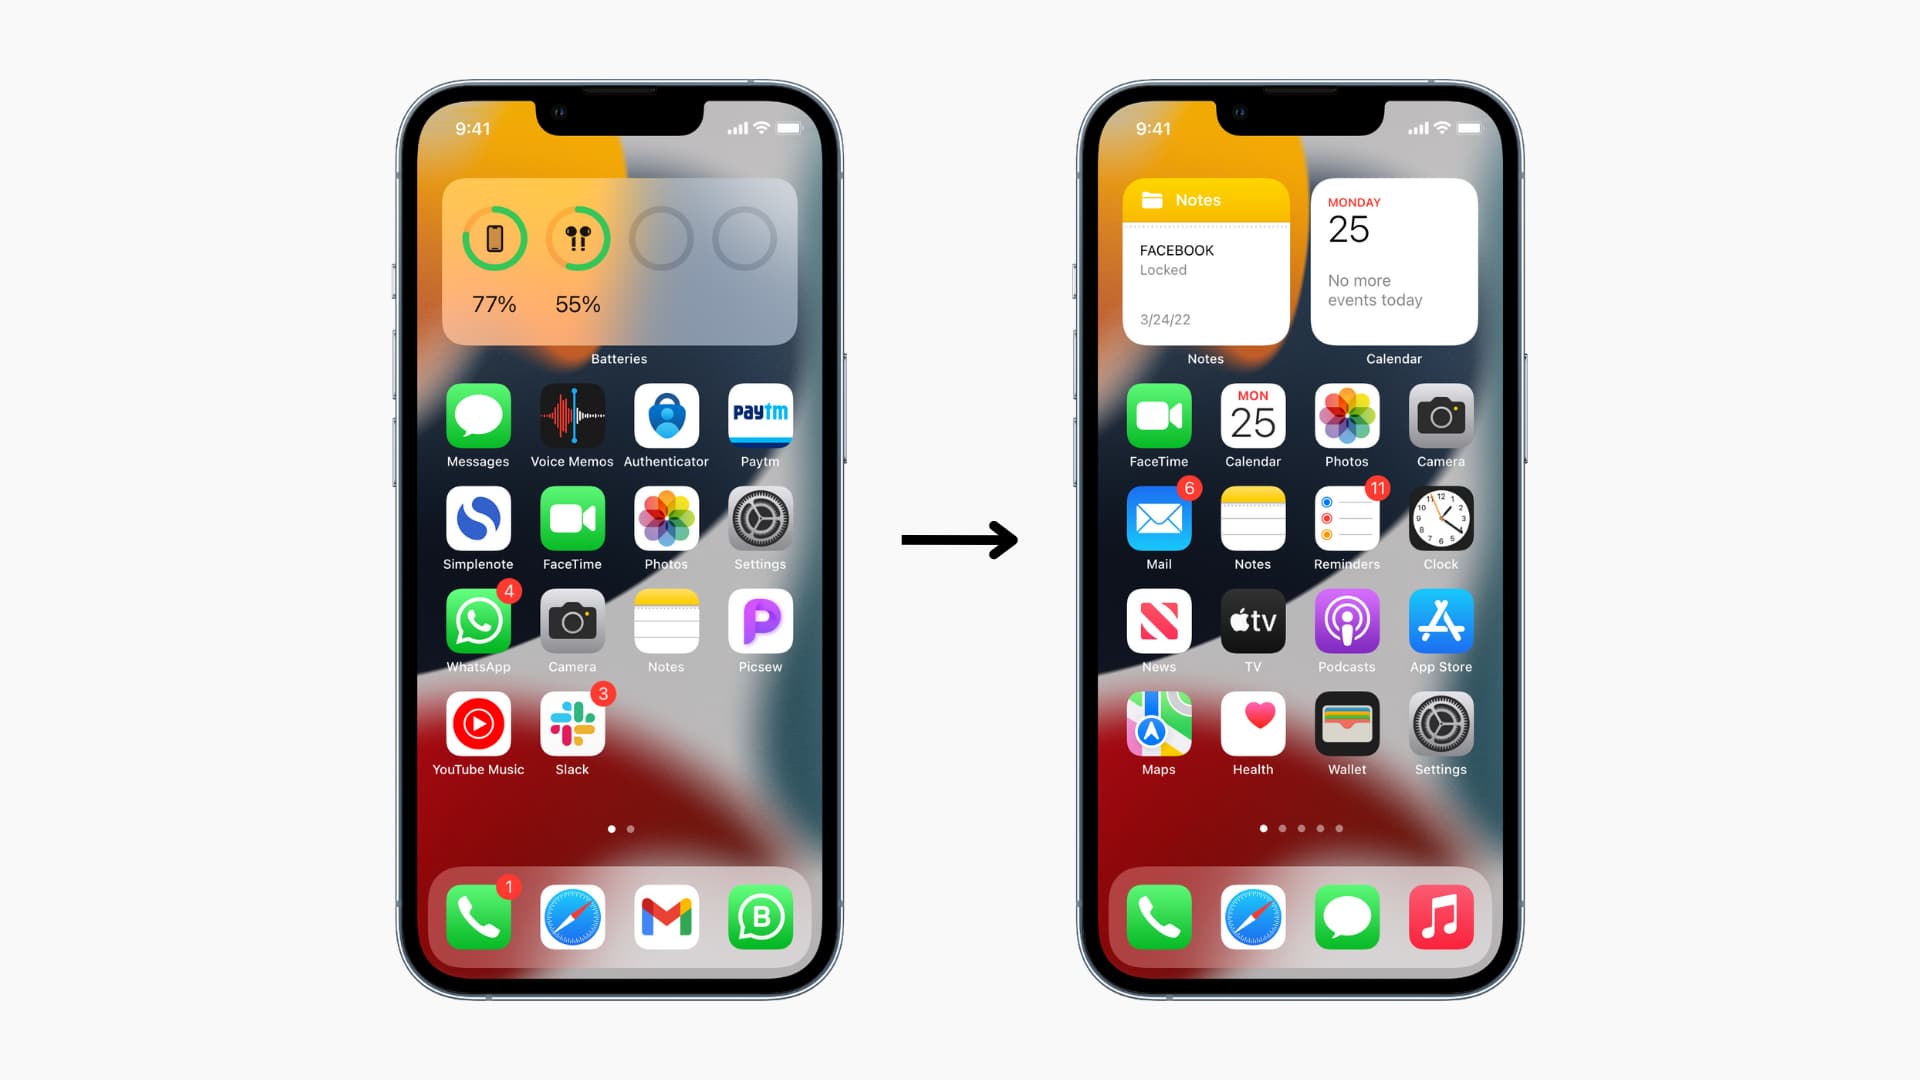 Two iPhones on a light background with first iPhone showing personalized Home Screen and the second iPhone showing reset Home Screen layout